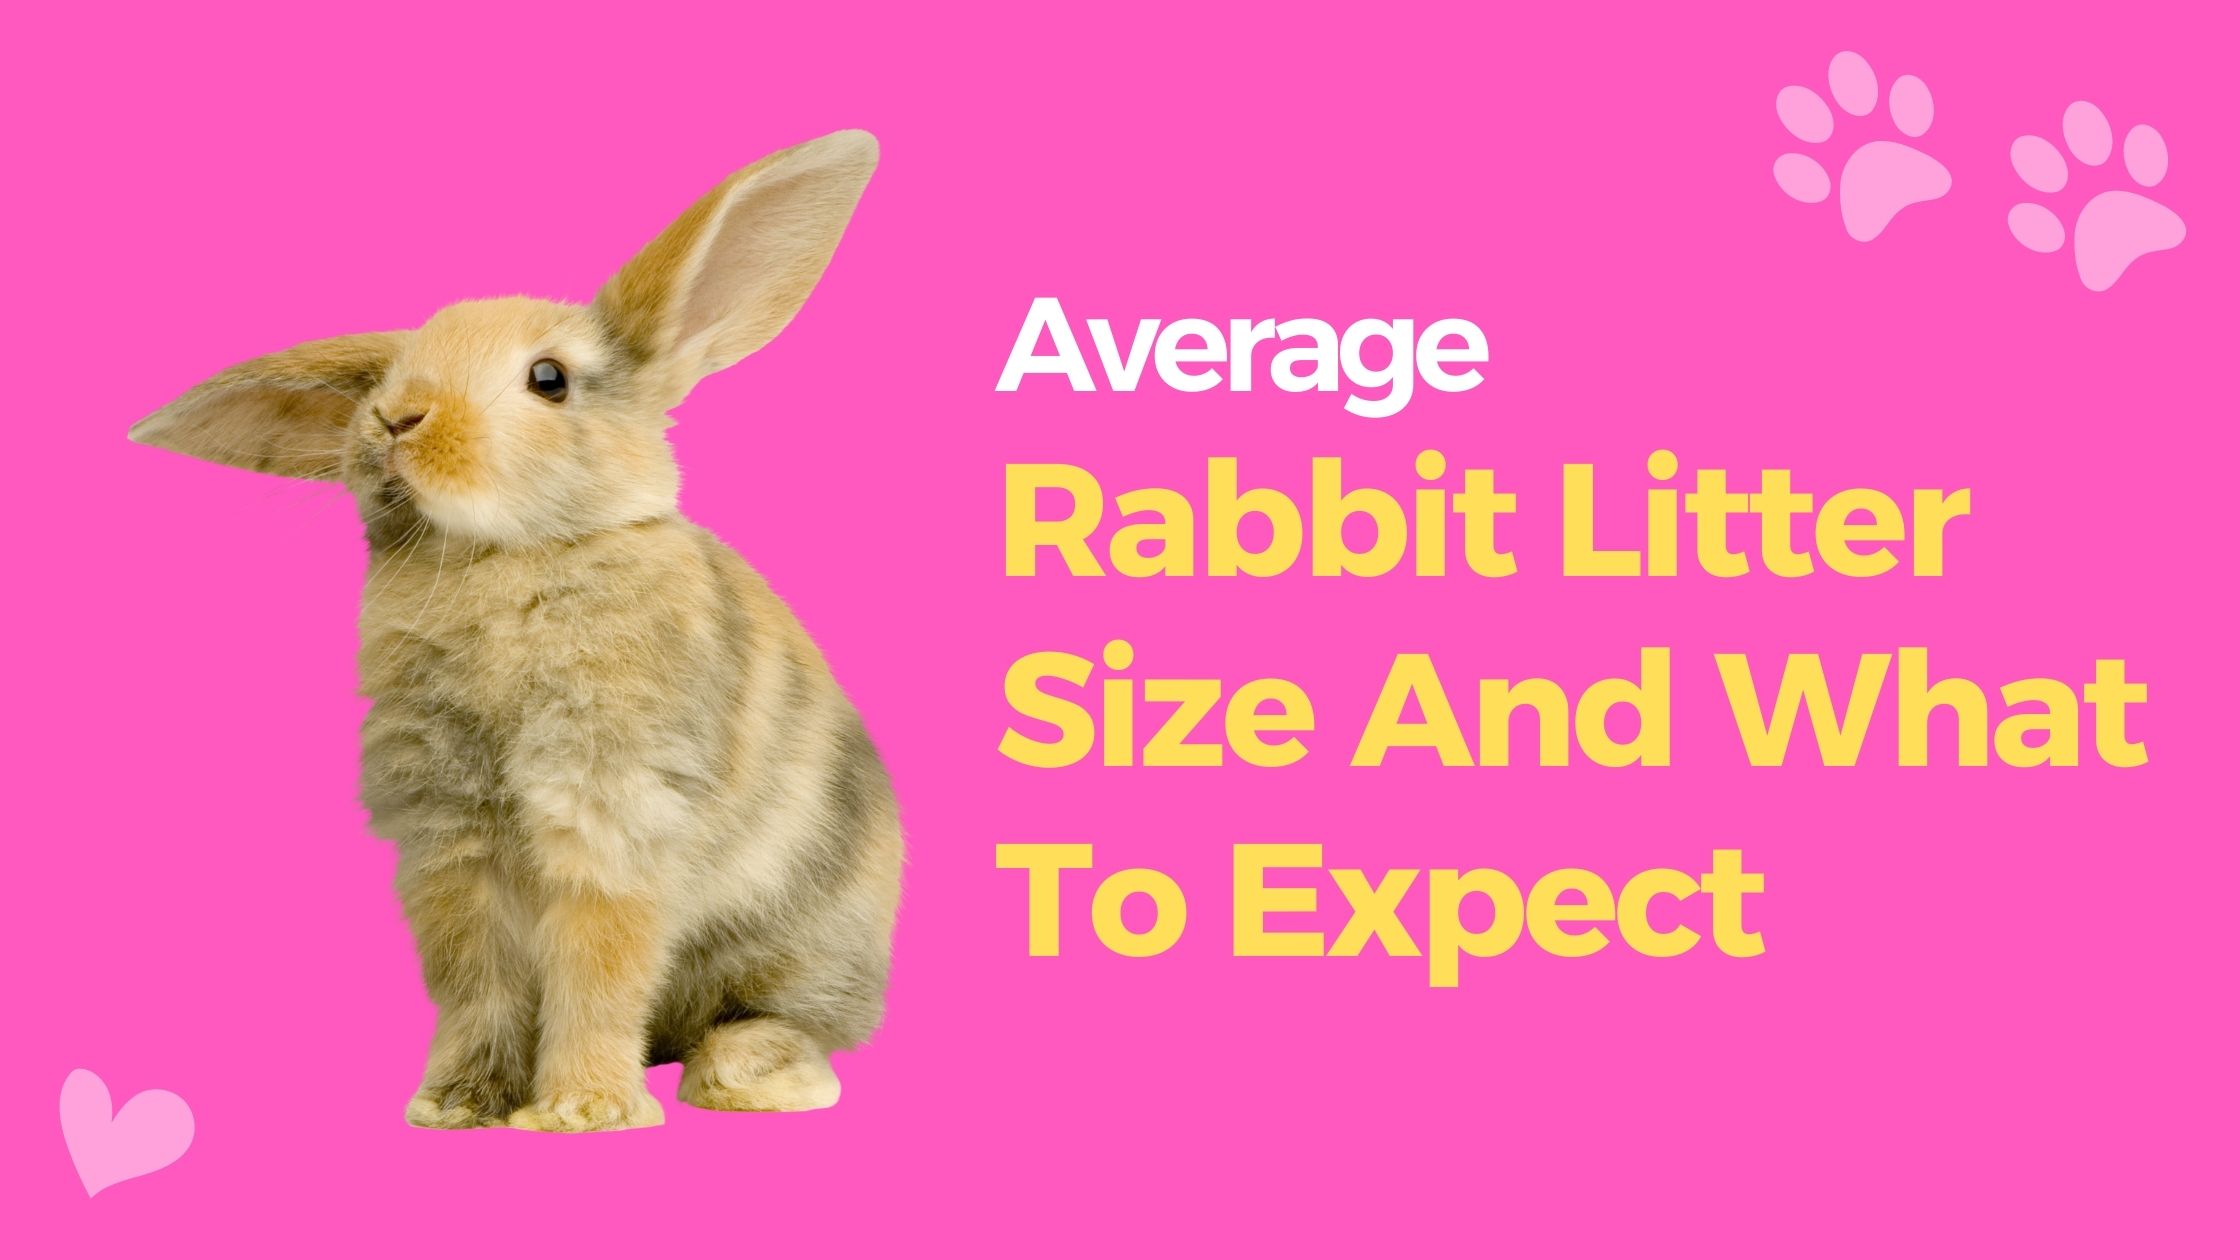 Average Rabbit Litter Size And What To Expect